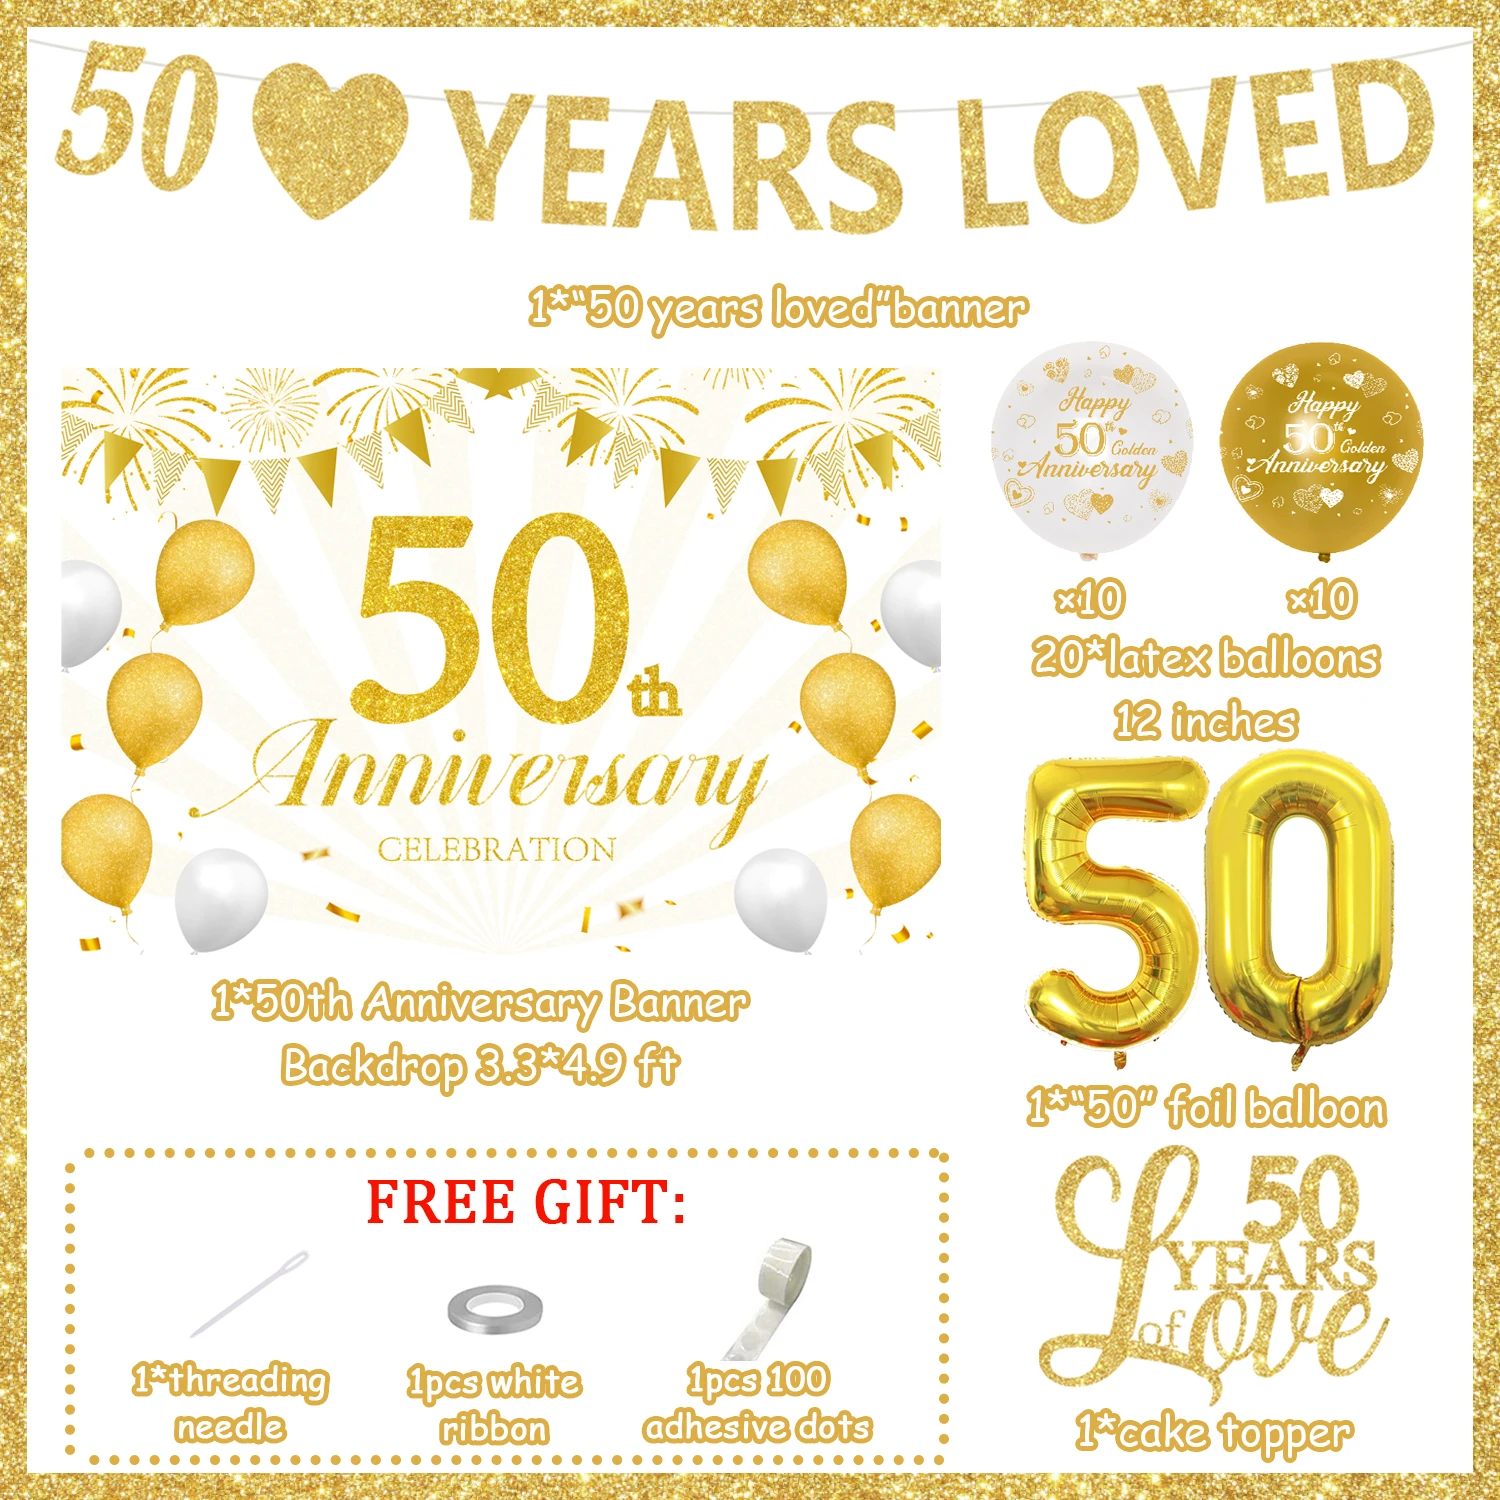 Wedding anniversary party decor Gold 50th anniversary Cake topper 50 golden  years Cake topper Engagement Party - AliExpress